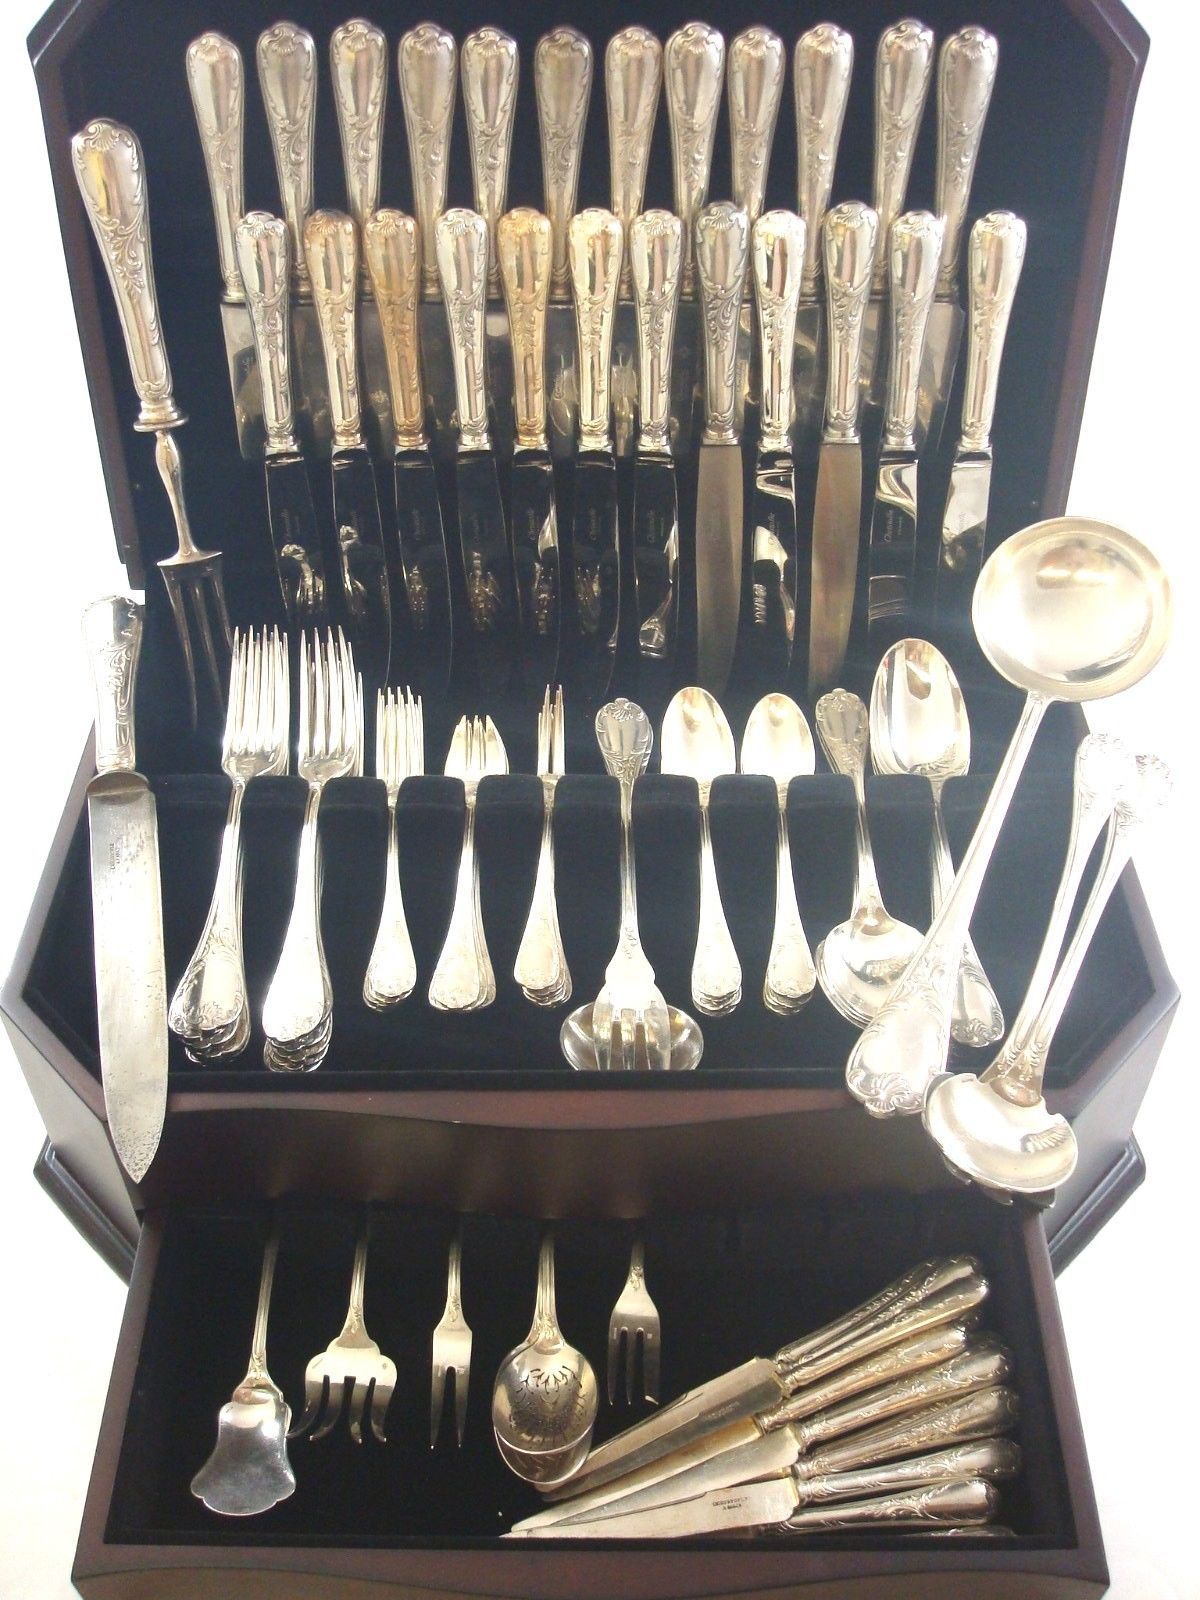 Marly by Christofle silver plate flatware set-massive 166 pieces. This set includes:

12 hollow handle with stainless blades dinner knives, 10